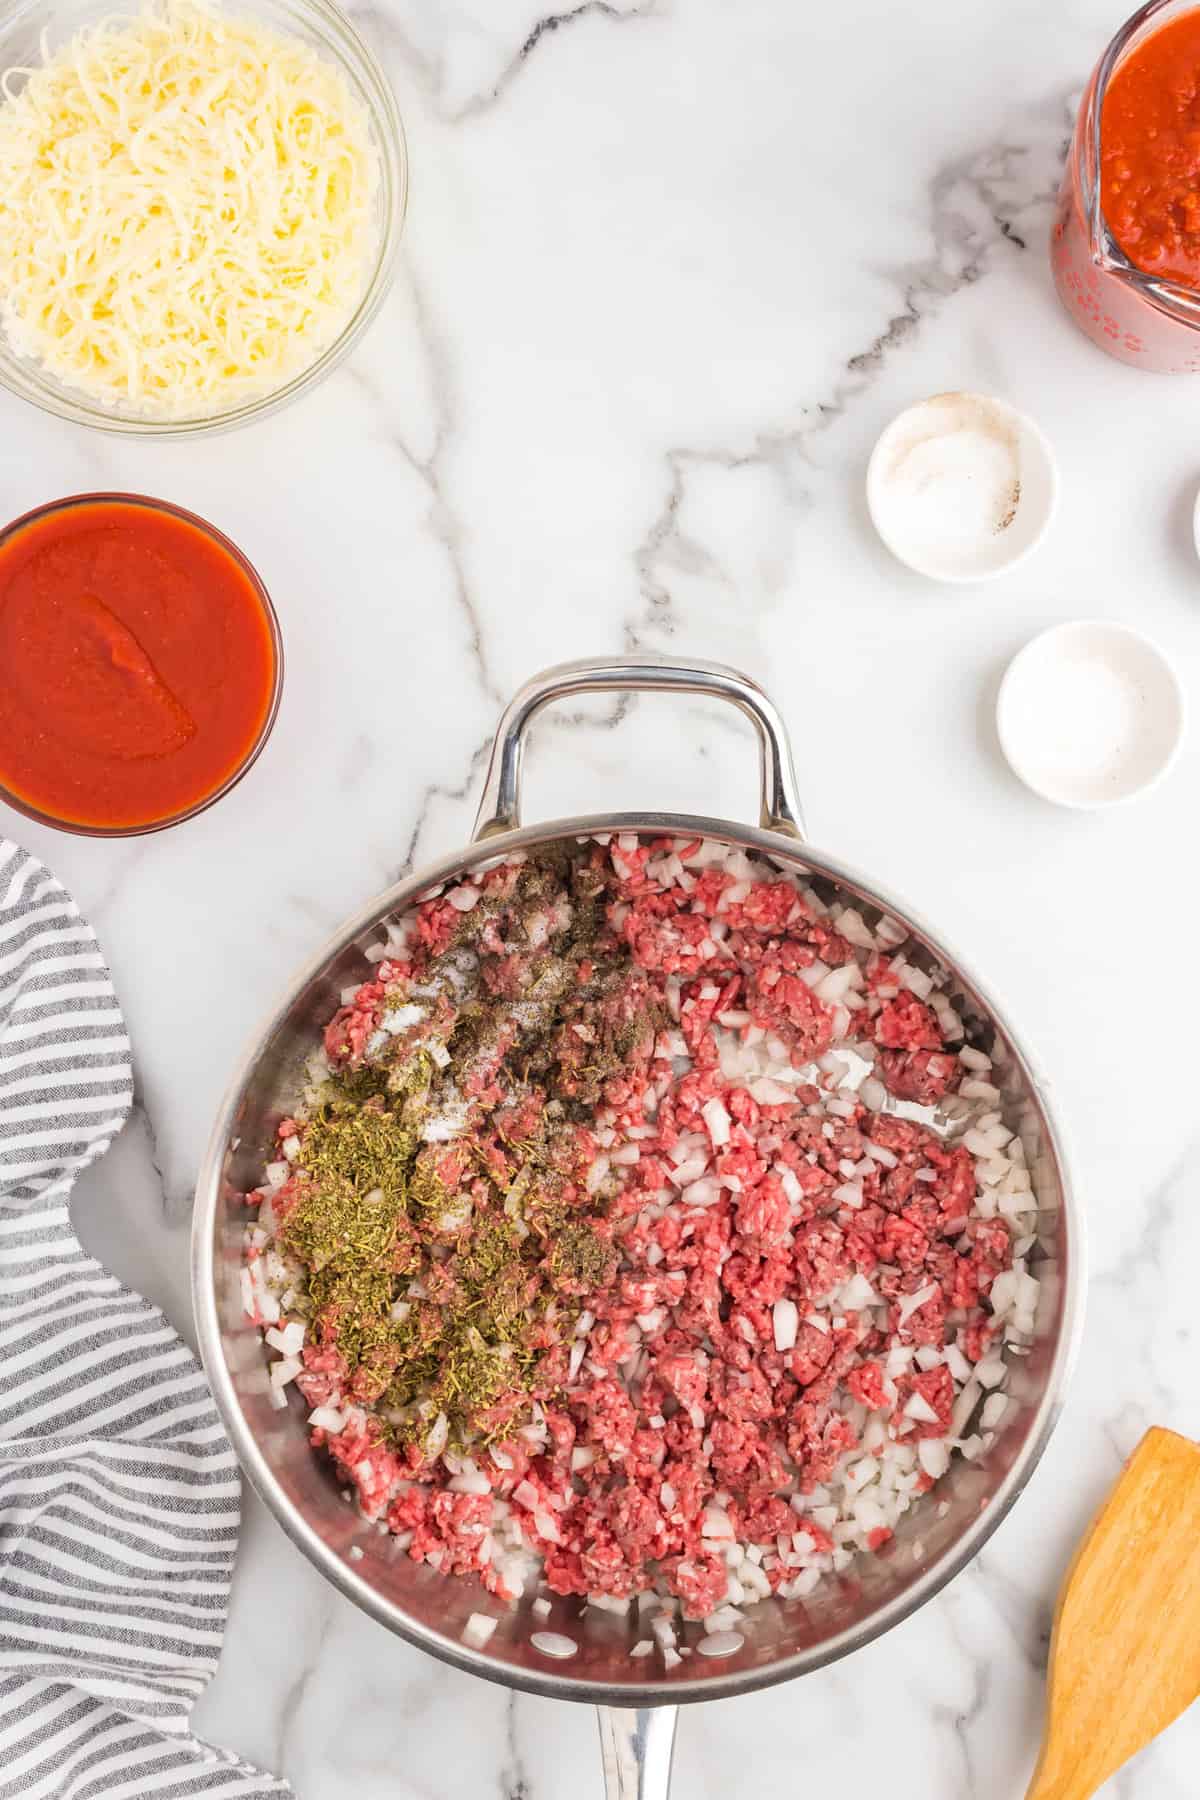 Ground beef and other seasonings in stovetop skillet for Ground Beef Casserole recipe